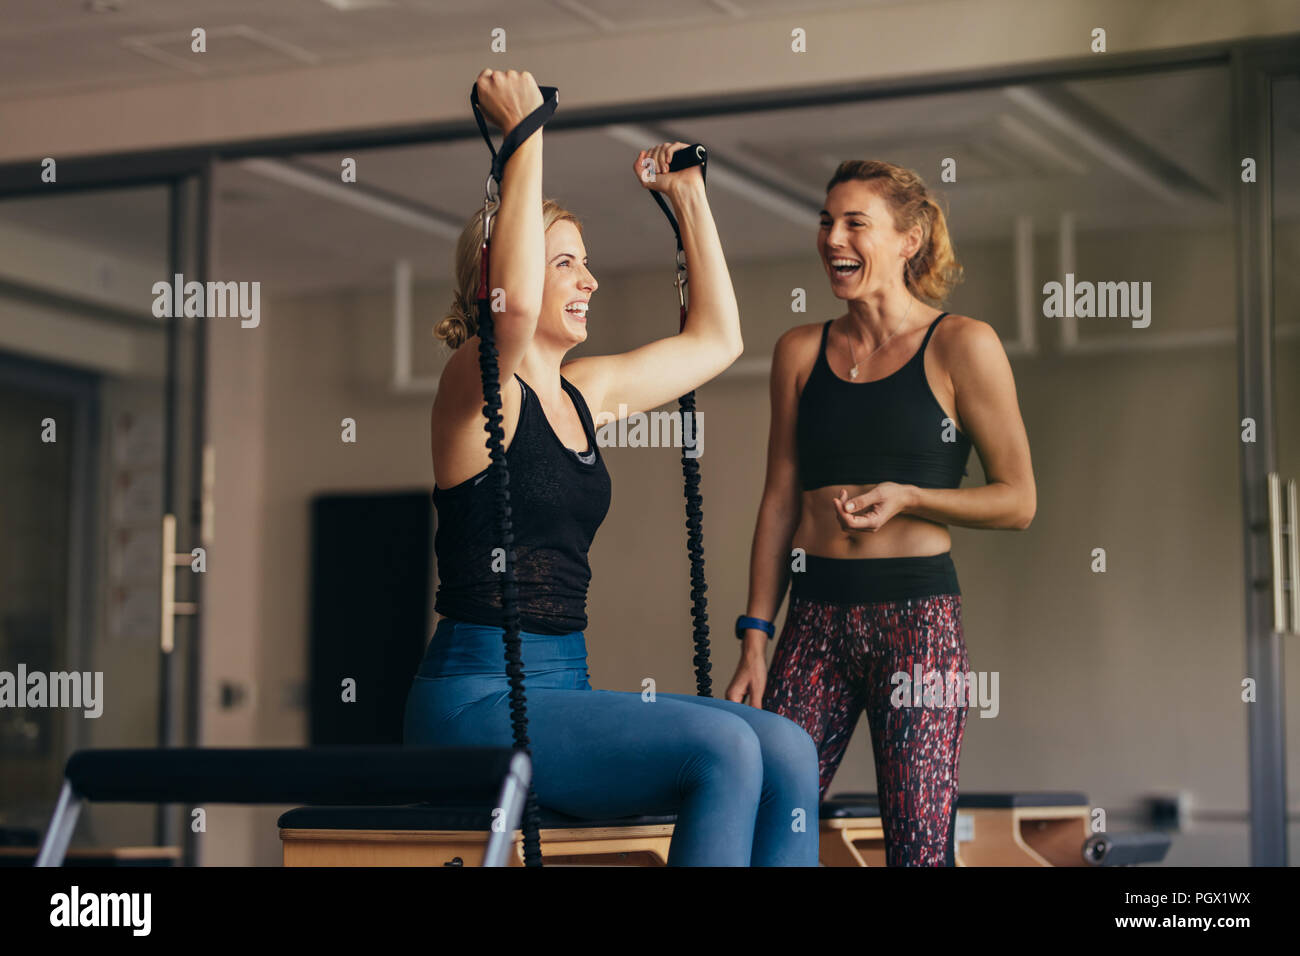 Smiling woman pulling stretch bands during her pilates training. Women at a pilates training gym laughing while doing workout. Stock Photo